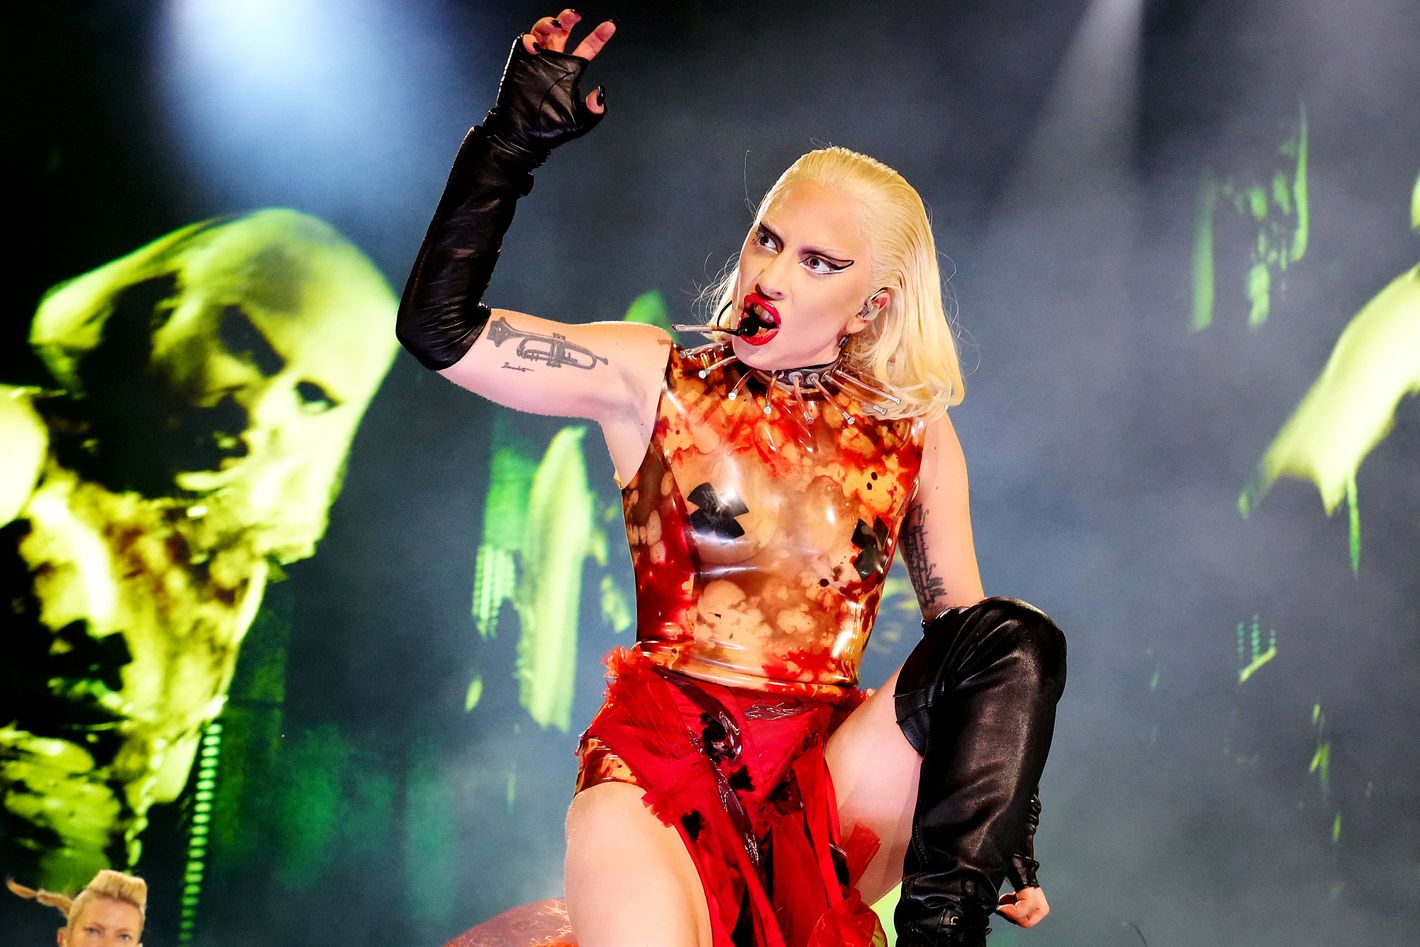 How Many Times Did Lady Gaga Say ‘Put Your Hands Up’ at the Chromatica Ball?